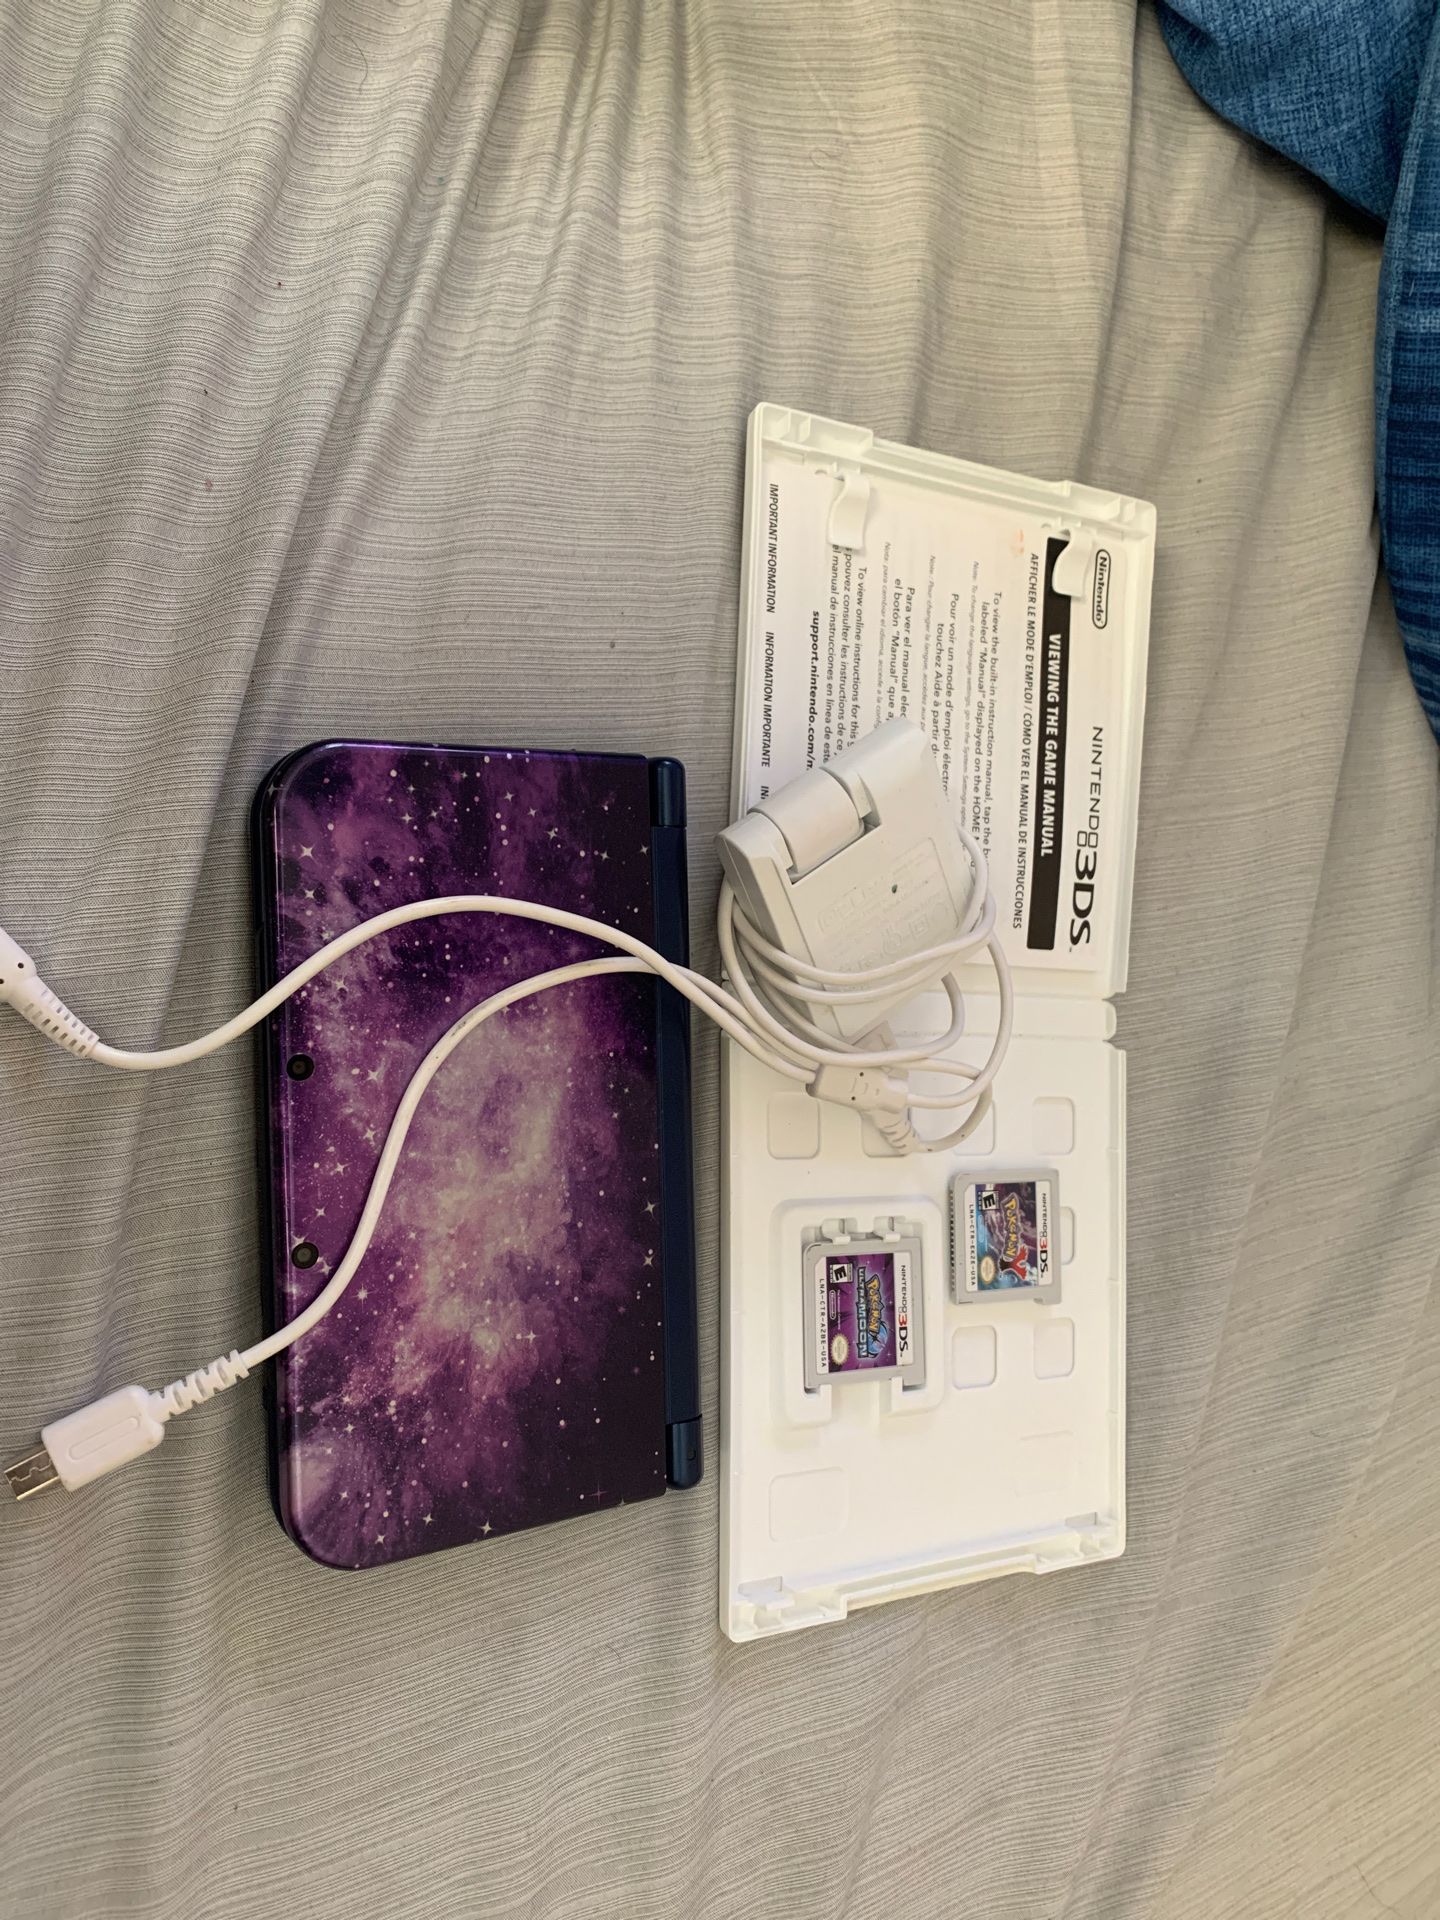 Galaxy Nintendo DS XL with games